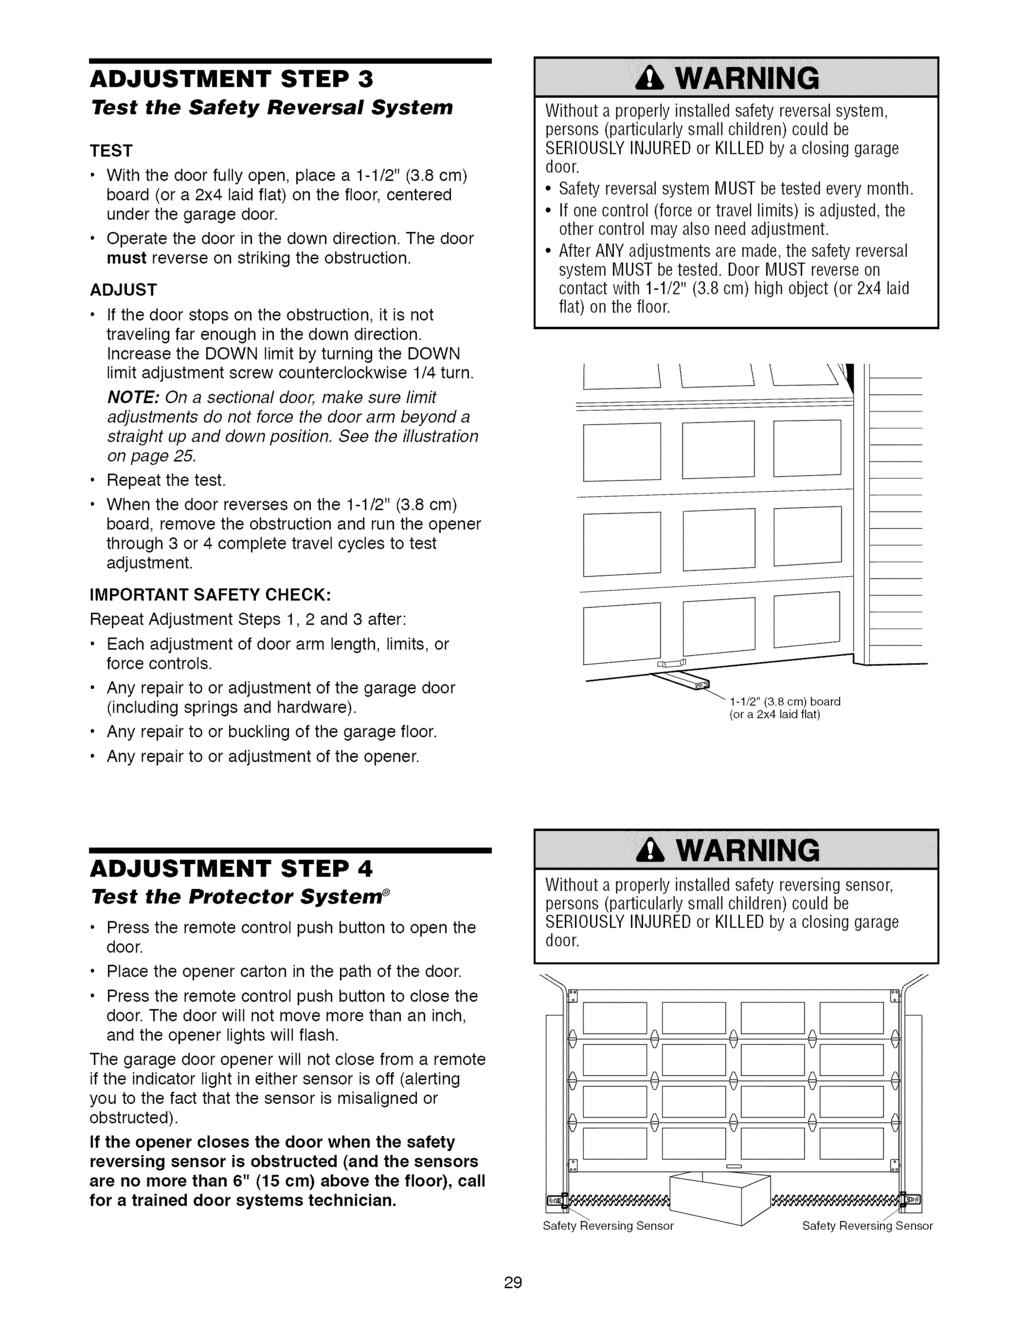 ADJUSTMENT STEP 3 Test the Safety Reversal System TEST With the door fully open, place a 1-1/2" (3.8 cm) board (or a 2x4 laid flat) on the floor, centered under the garage door.